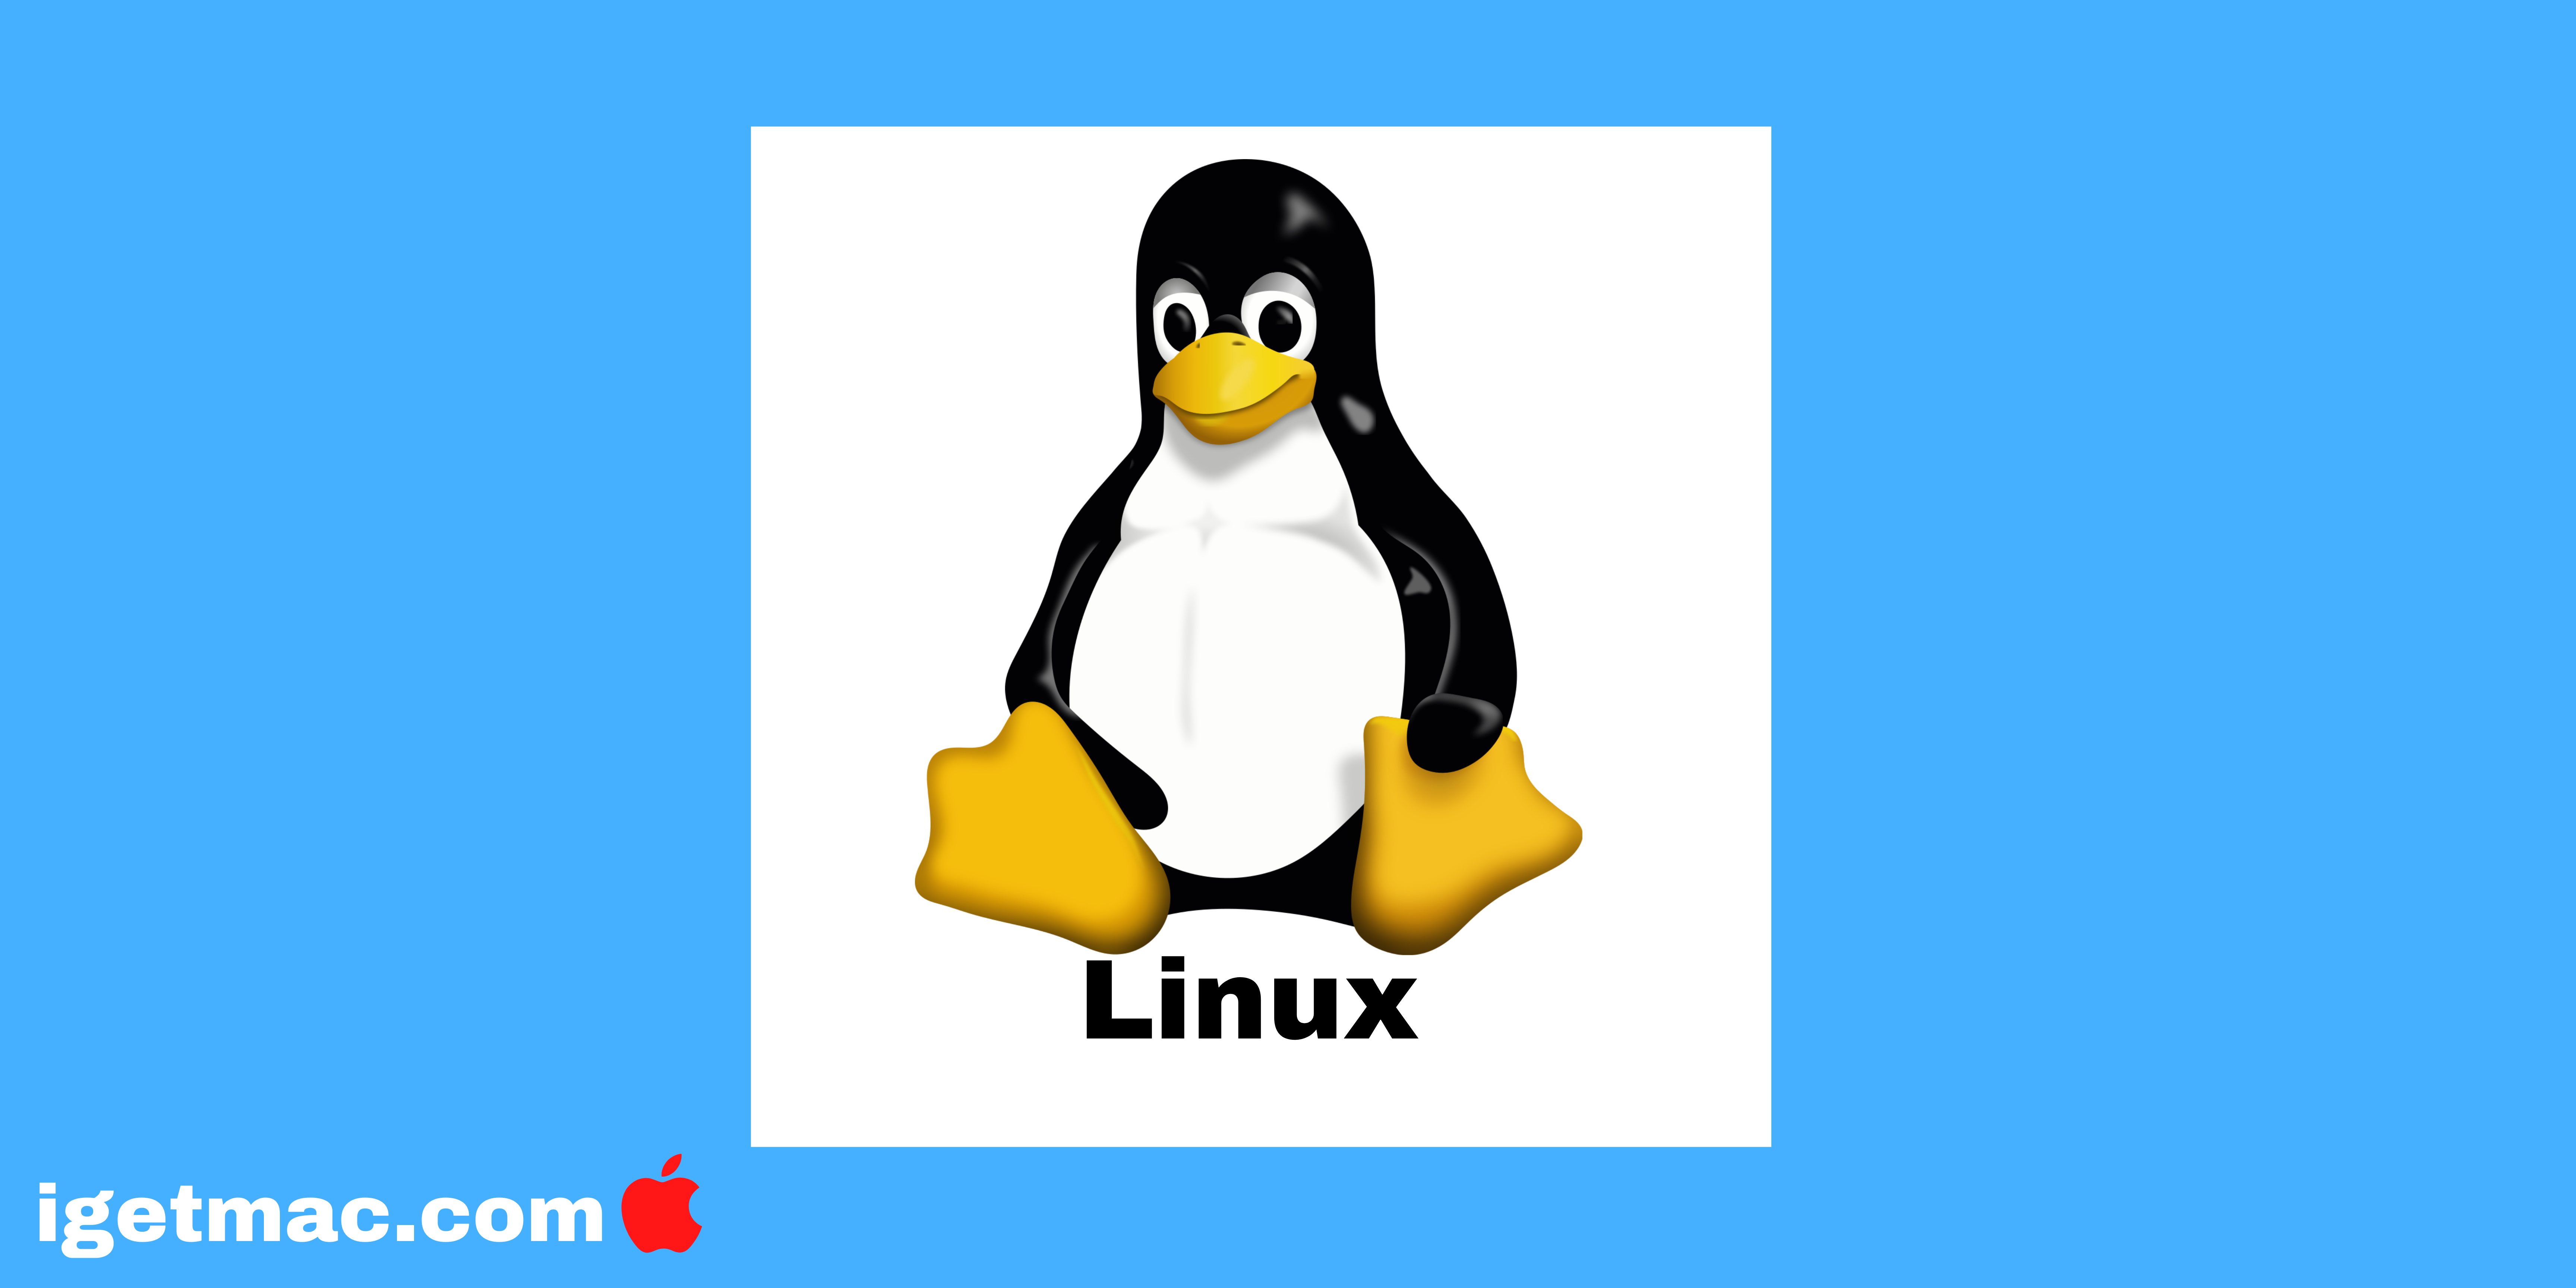 Computer Operating System Requirements of Linux OS